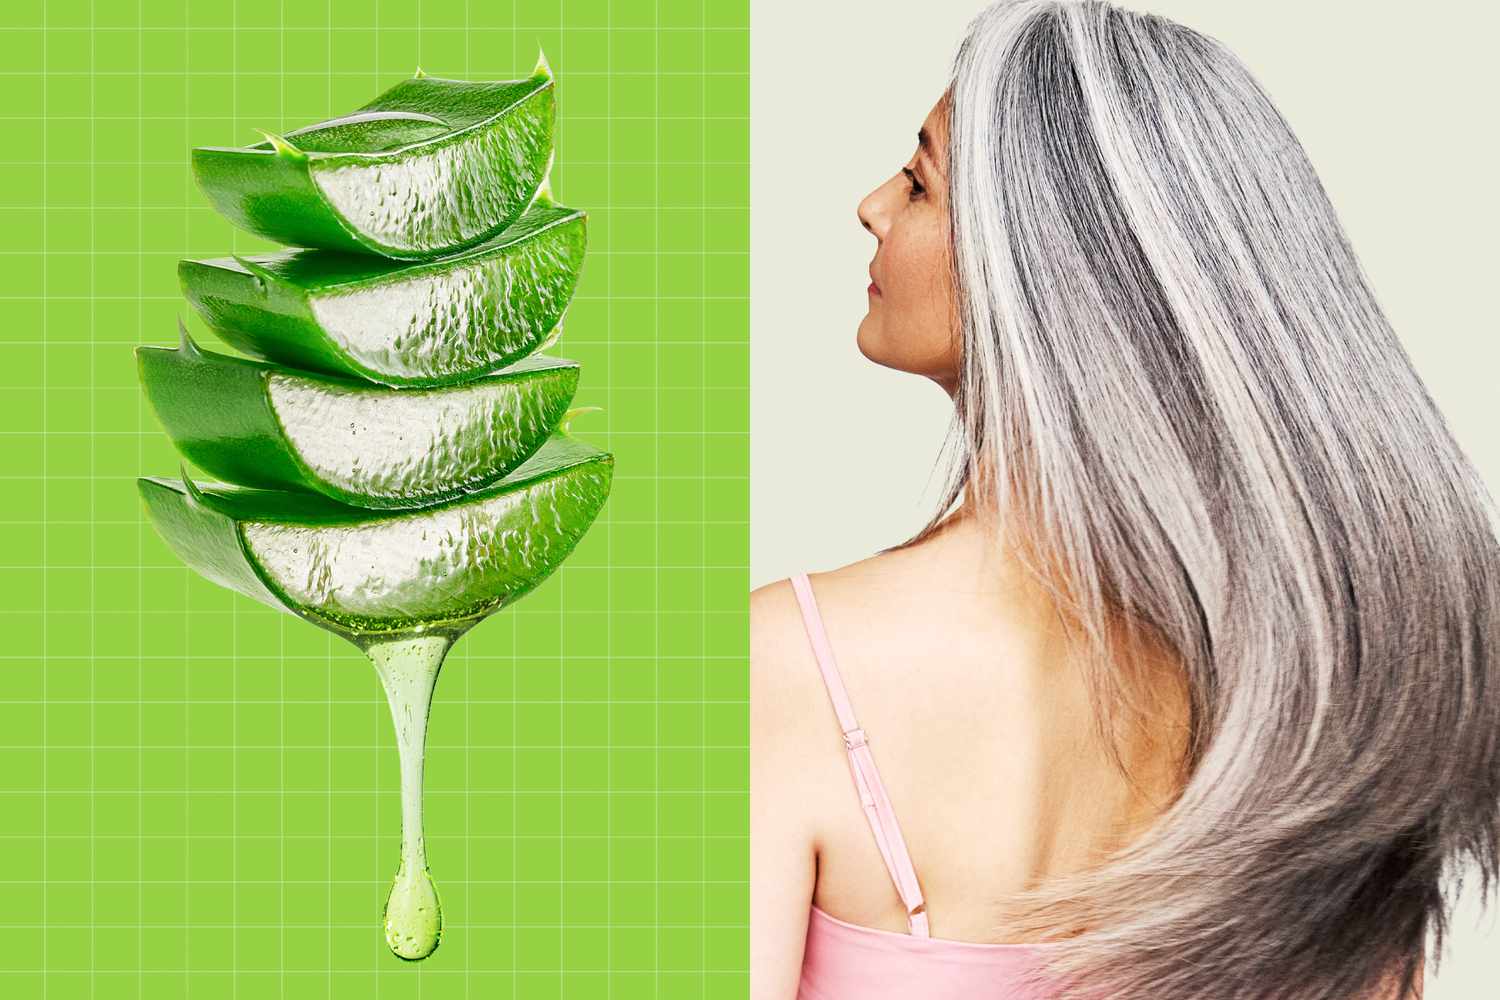 Aloe slices next to a woman with grey hair